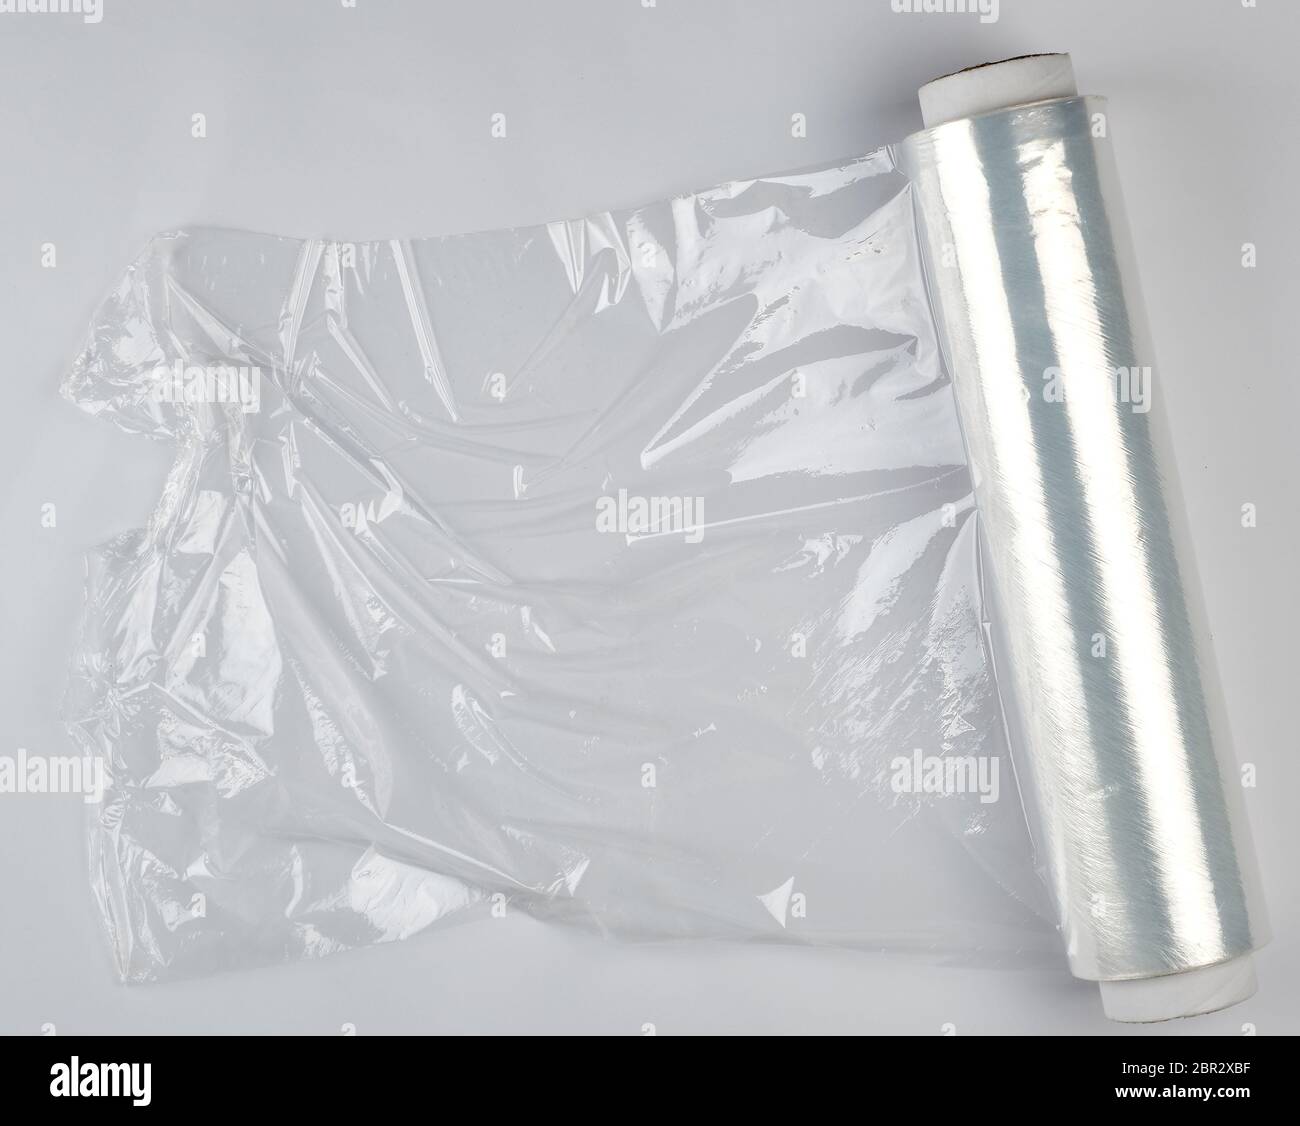 https://c8.alamy.com/comp/2BR2XBF/big-roll-of-wound-white-transparent-film-for-wrapping-food-top-view-2BR2XBF.jpg